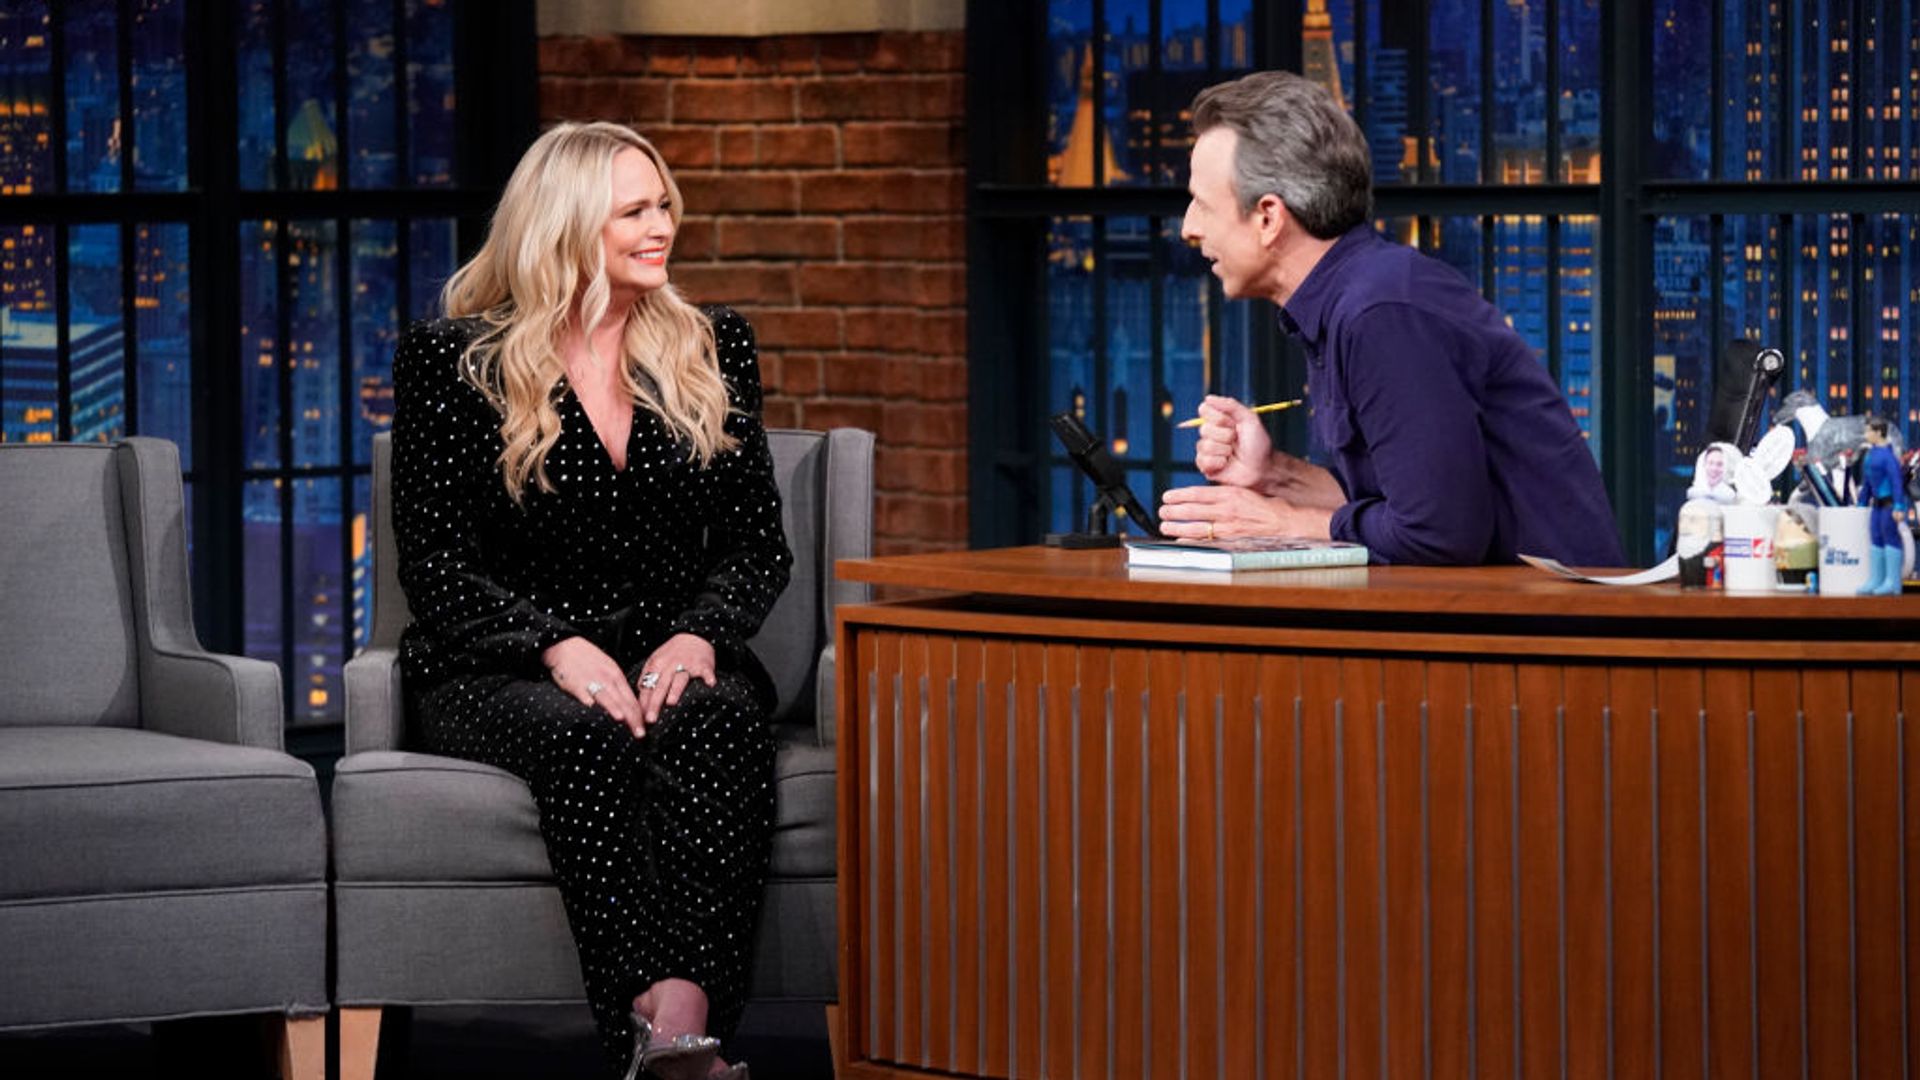 Miranda on Late Night with Seth Meyers. She is wearing a black suit embellished with diamantes